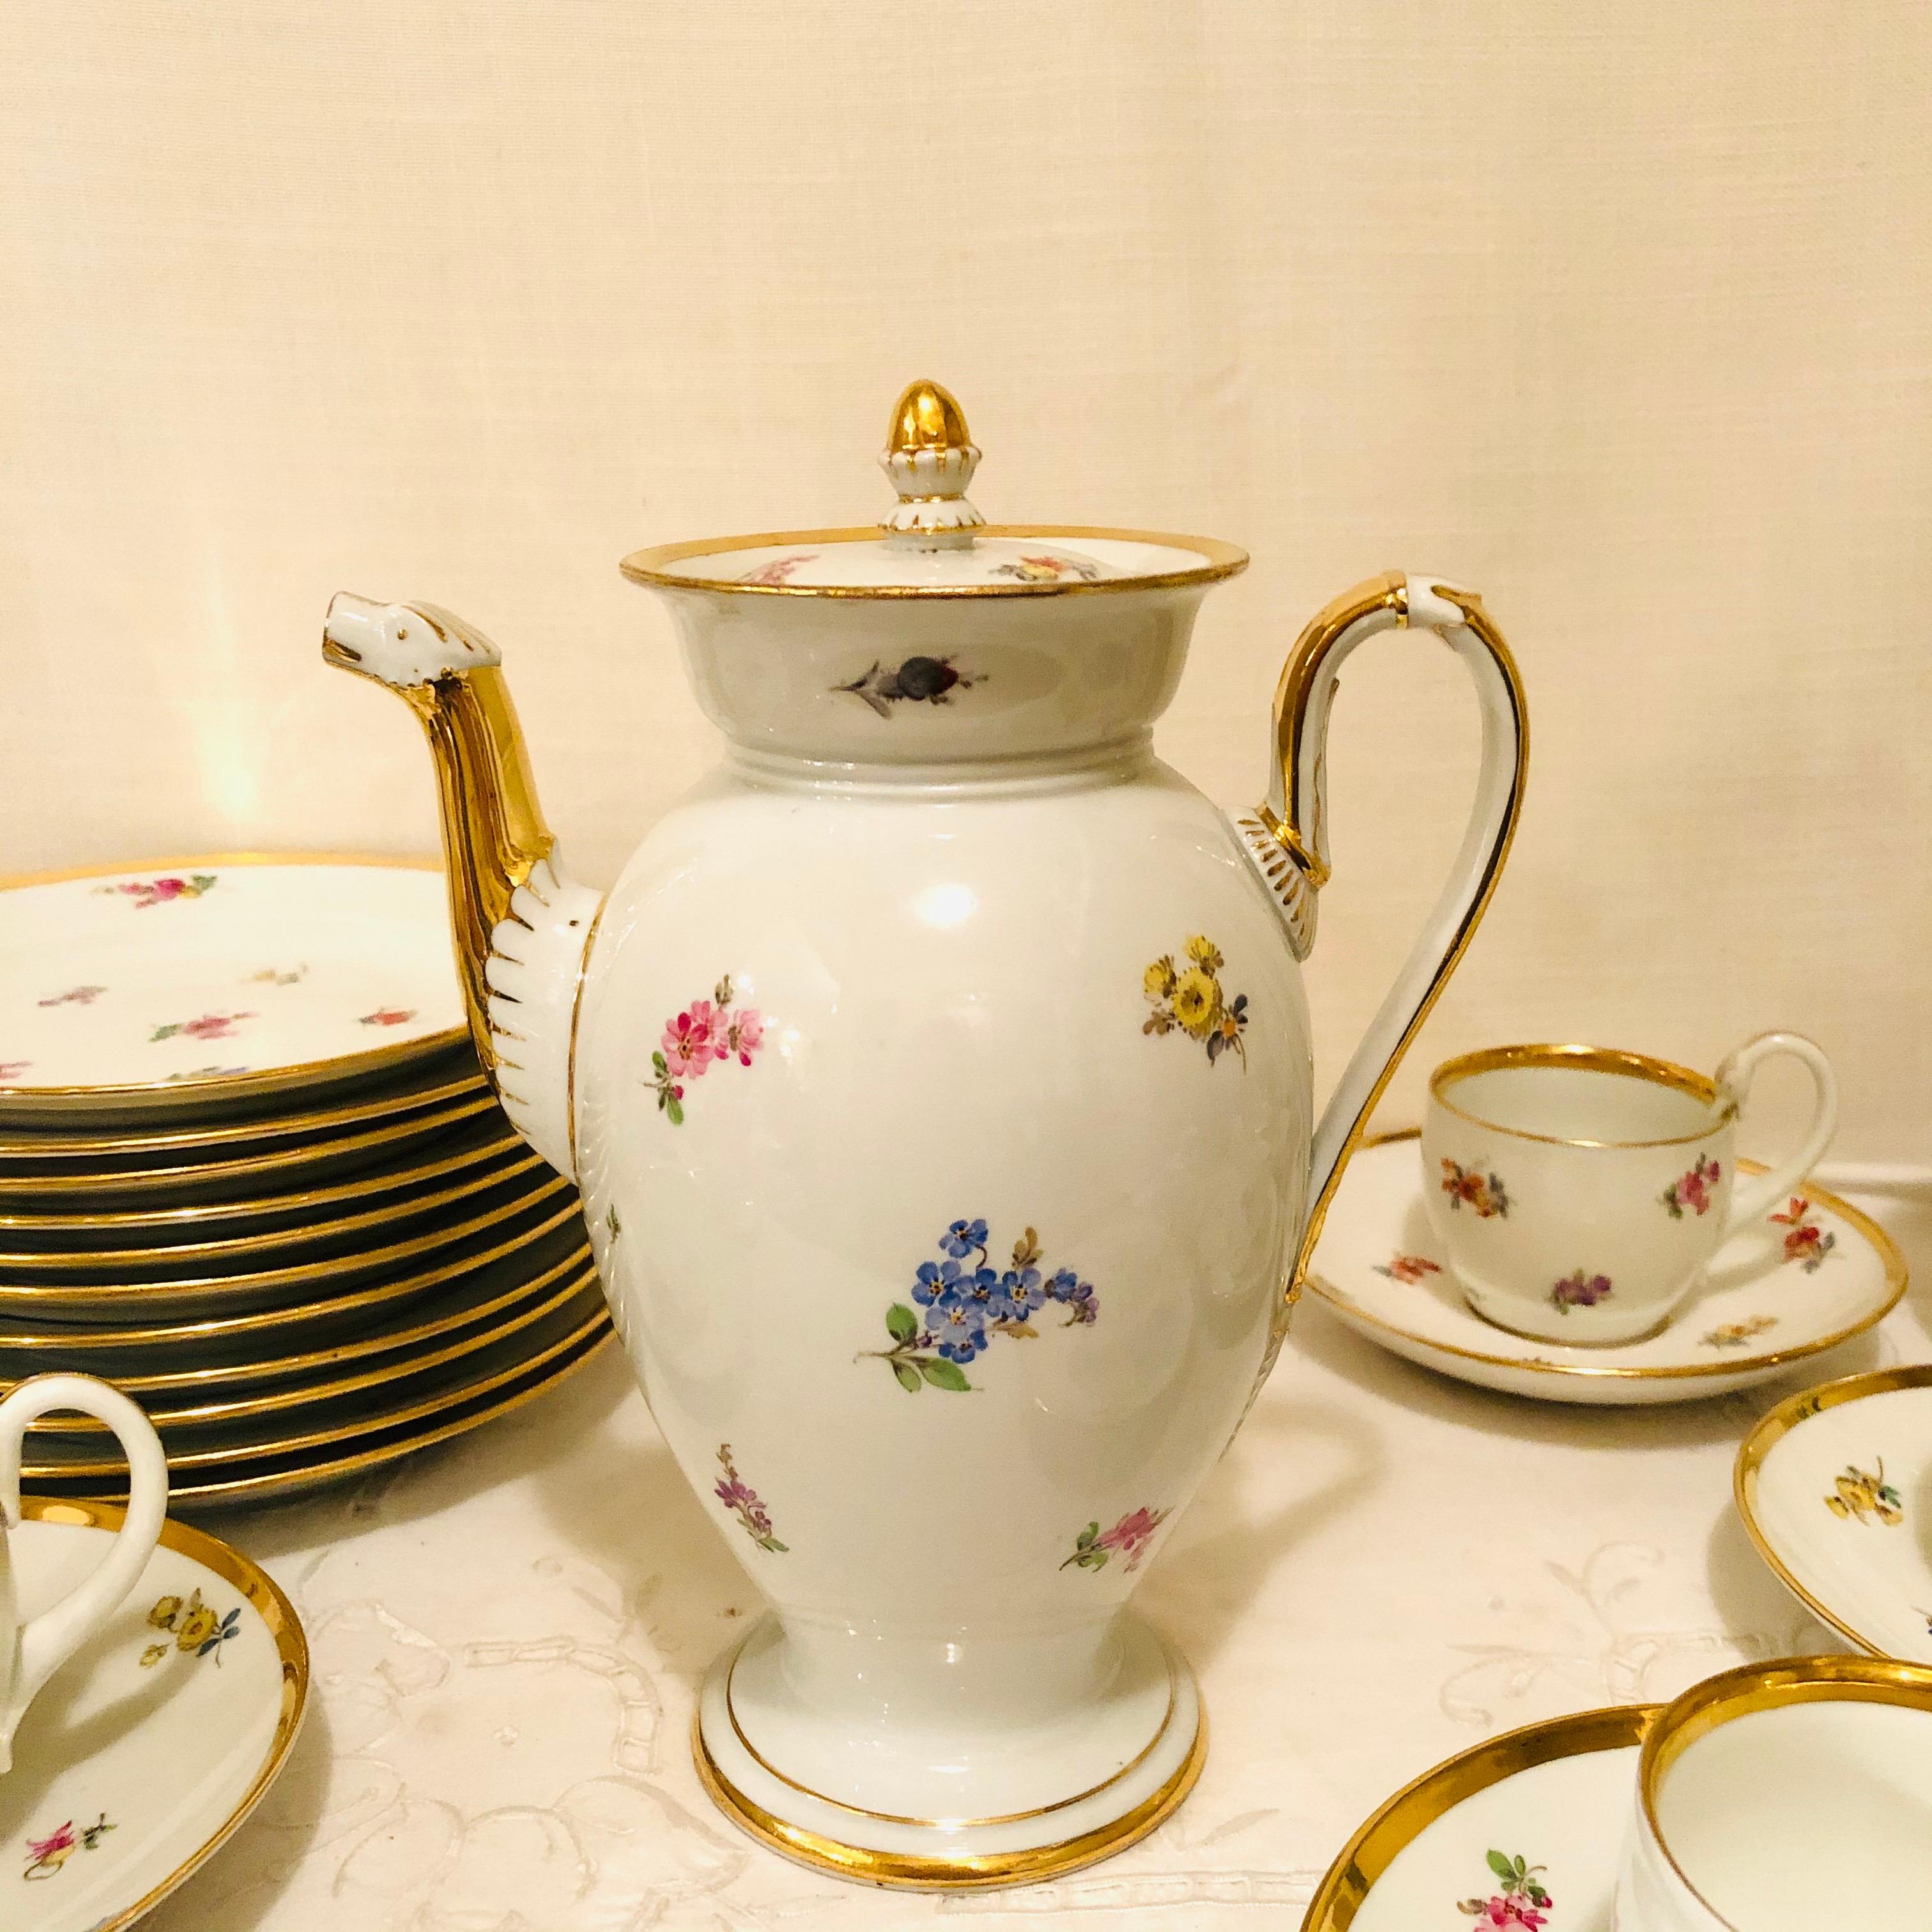 Neoclassical Meissen Streublumen Tea Set for 10 with Cups and Saucers, Cake Plates and Teapot